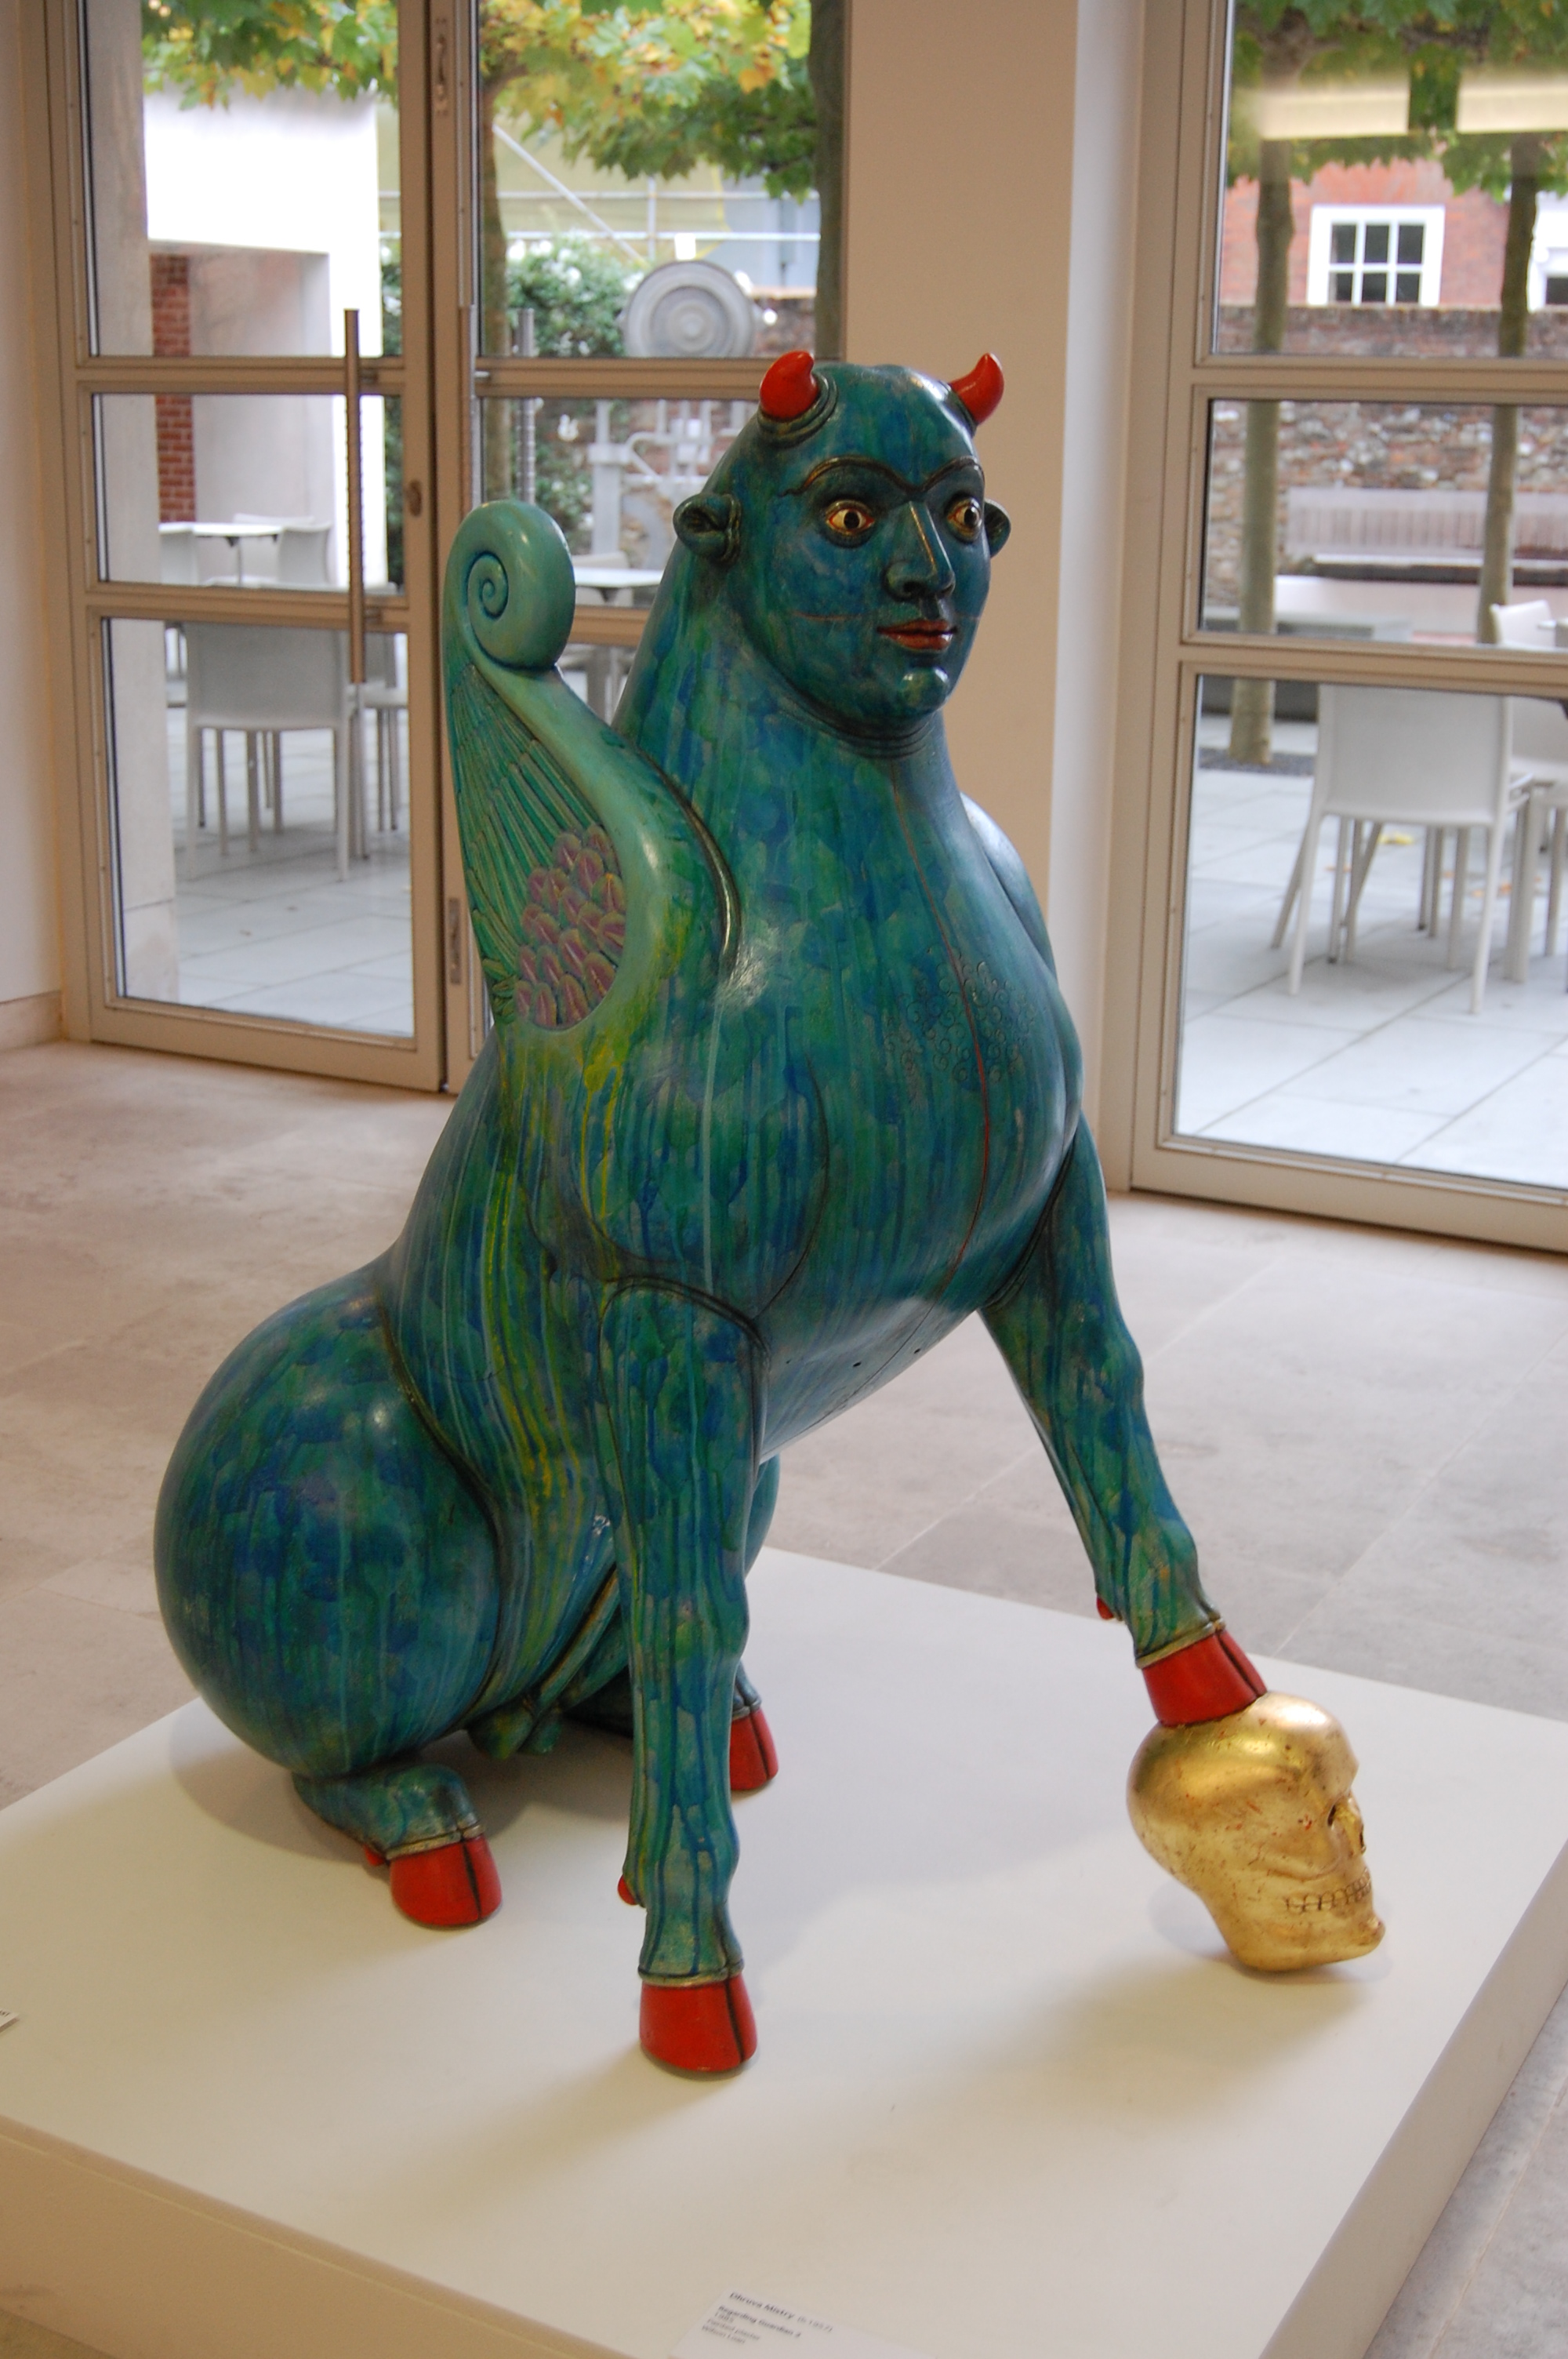 Sculpture of a blue creature with horns and wings and red hooves with one leg standing on gold skull